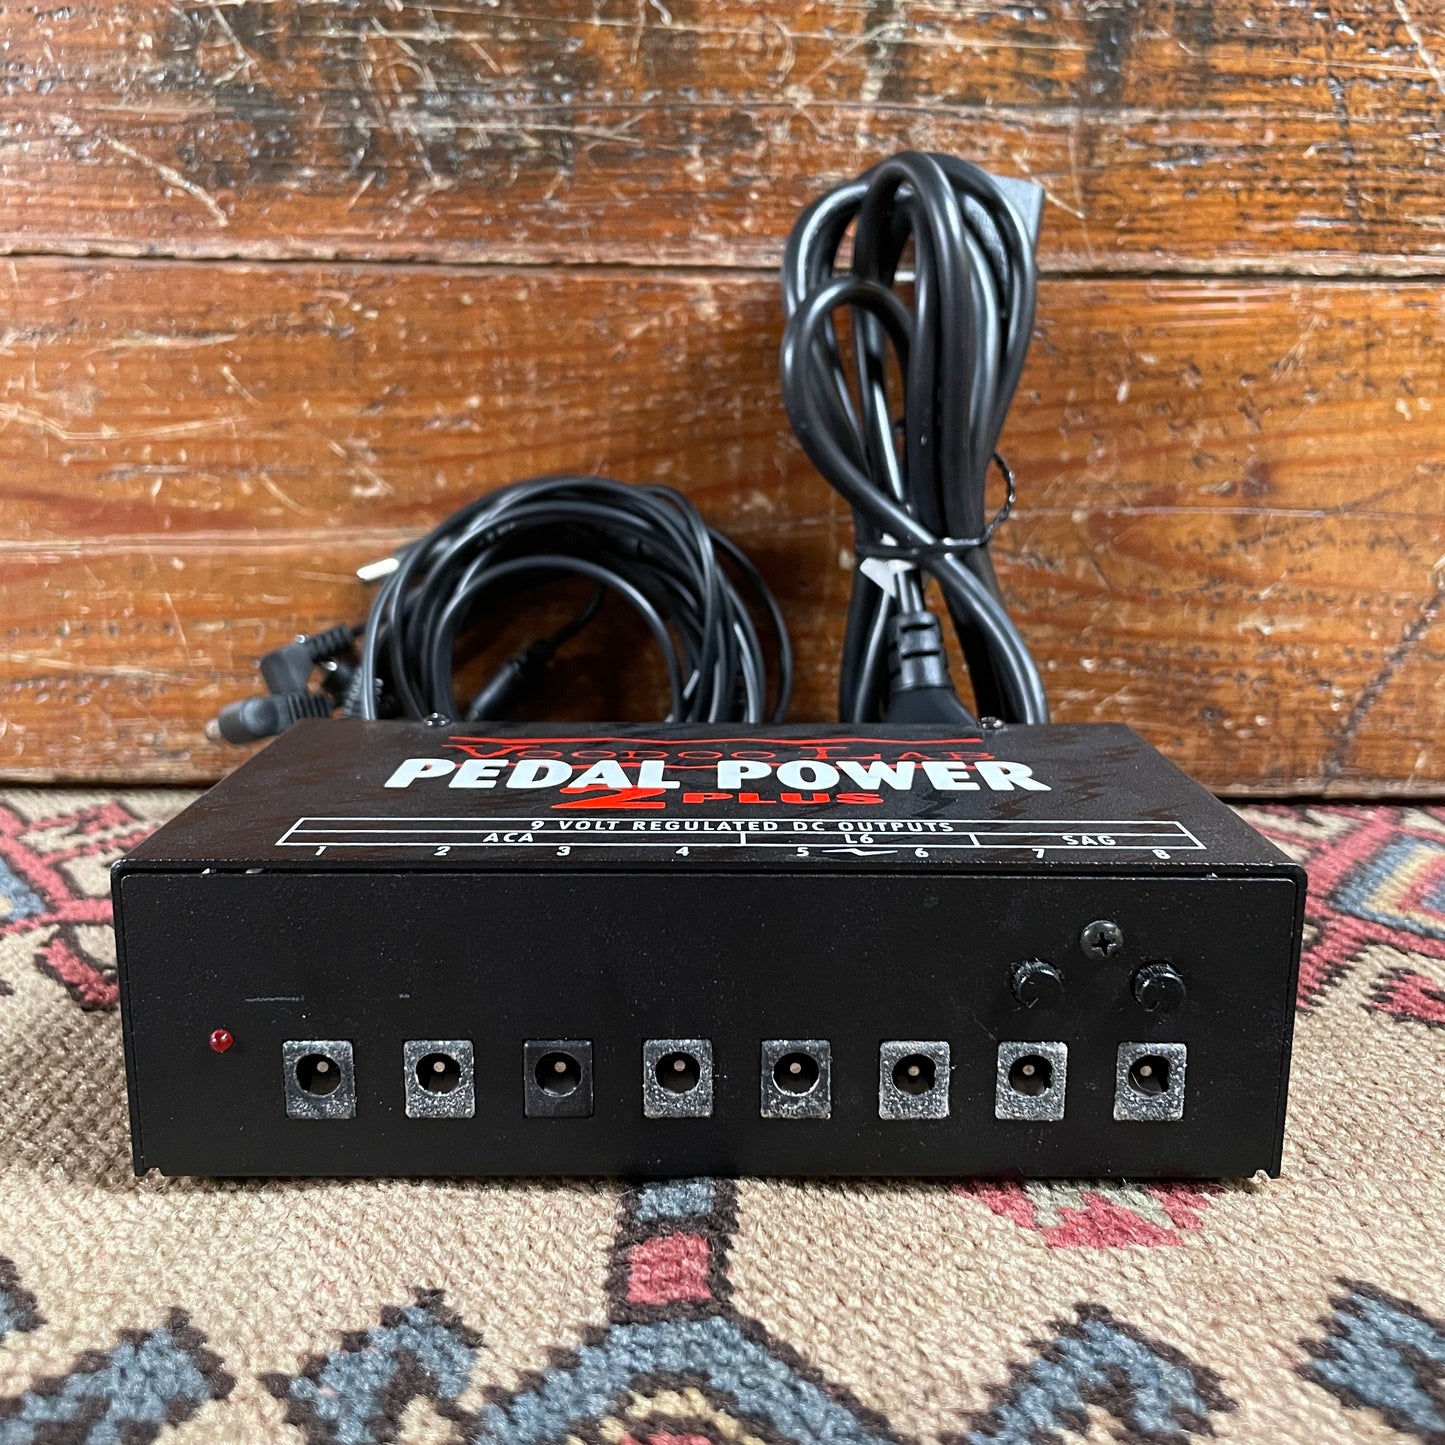 Voodoo Lab Pedal Power 2 PLUS 8-output Isolated Guitar Pedal Power Supply w/ Cables